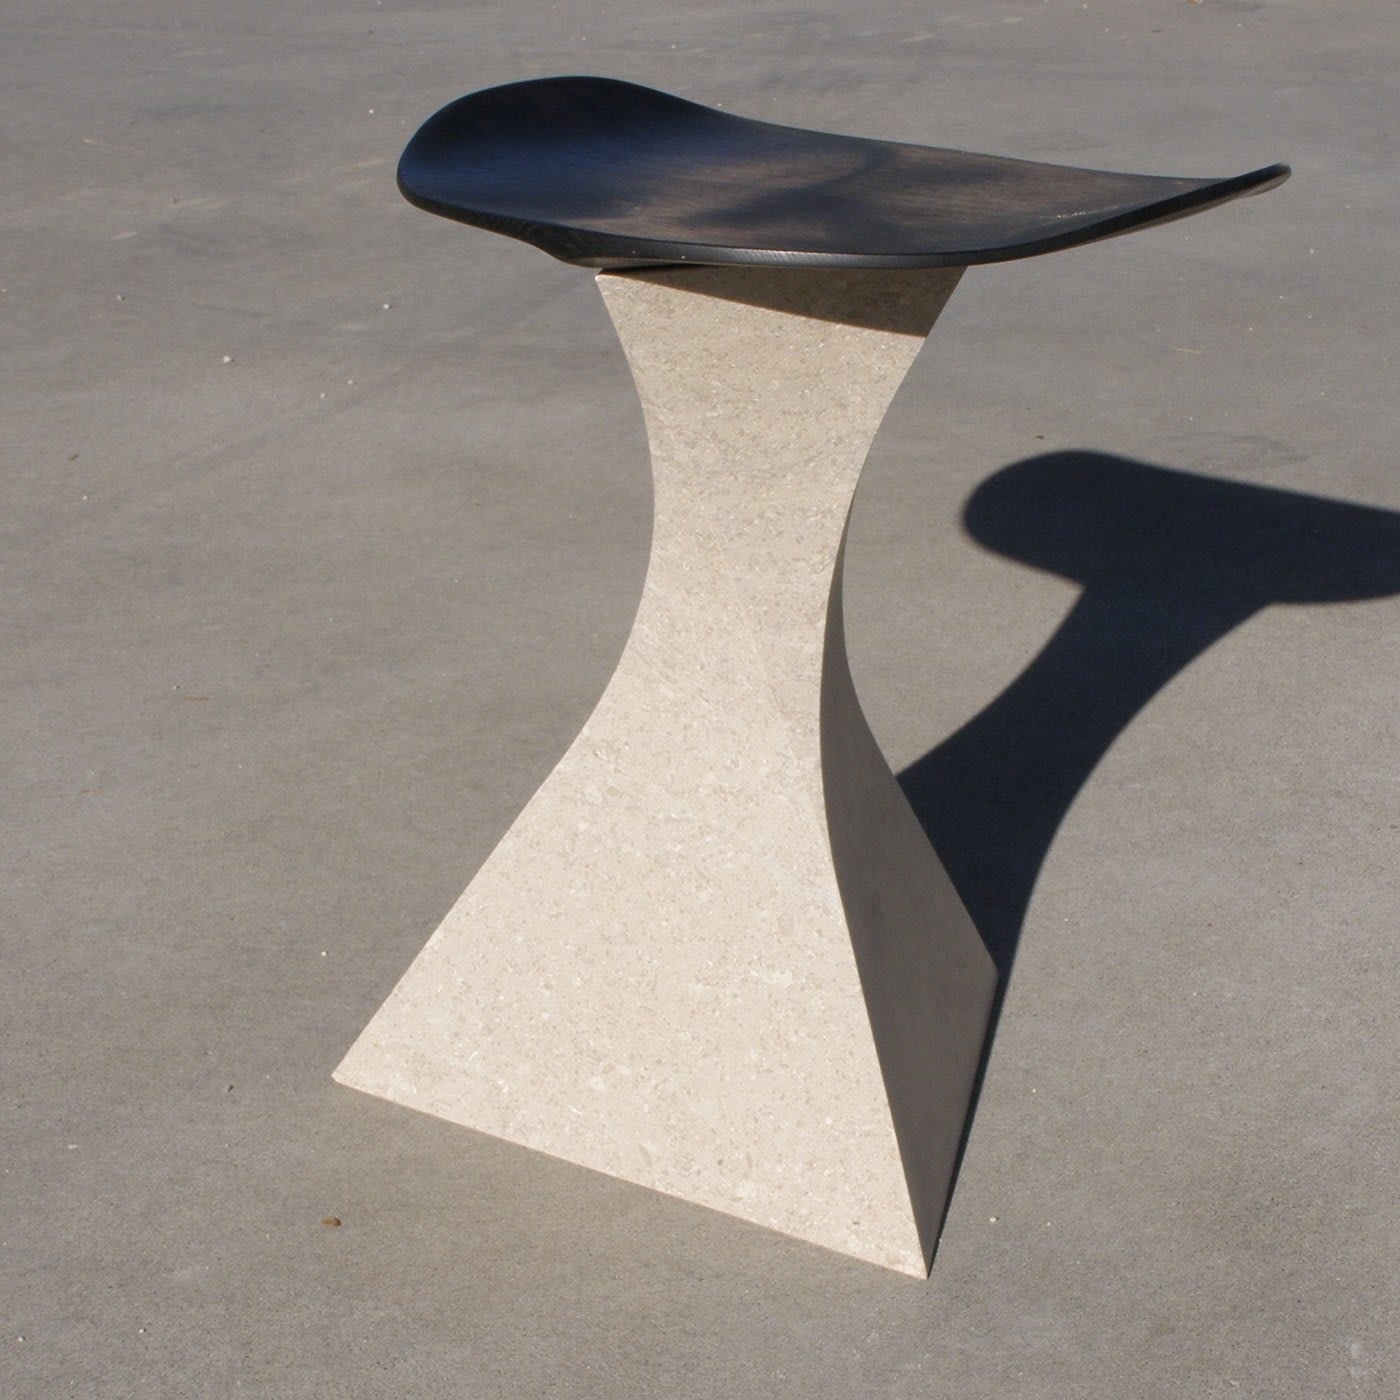 Audrey Black Stool by Mauro Dell'Orco - Faedo